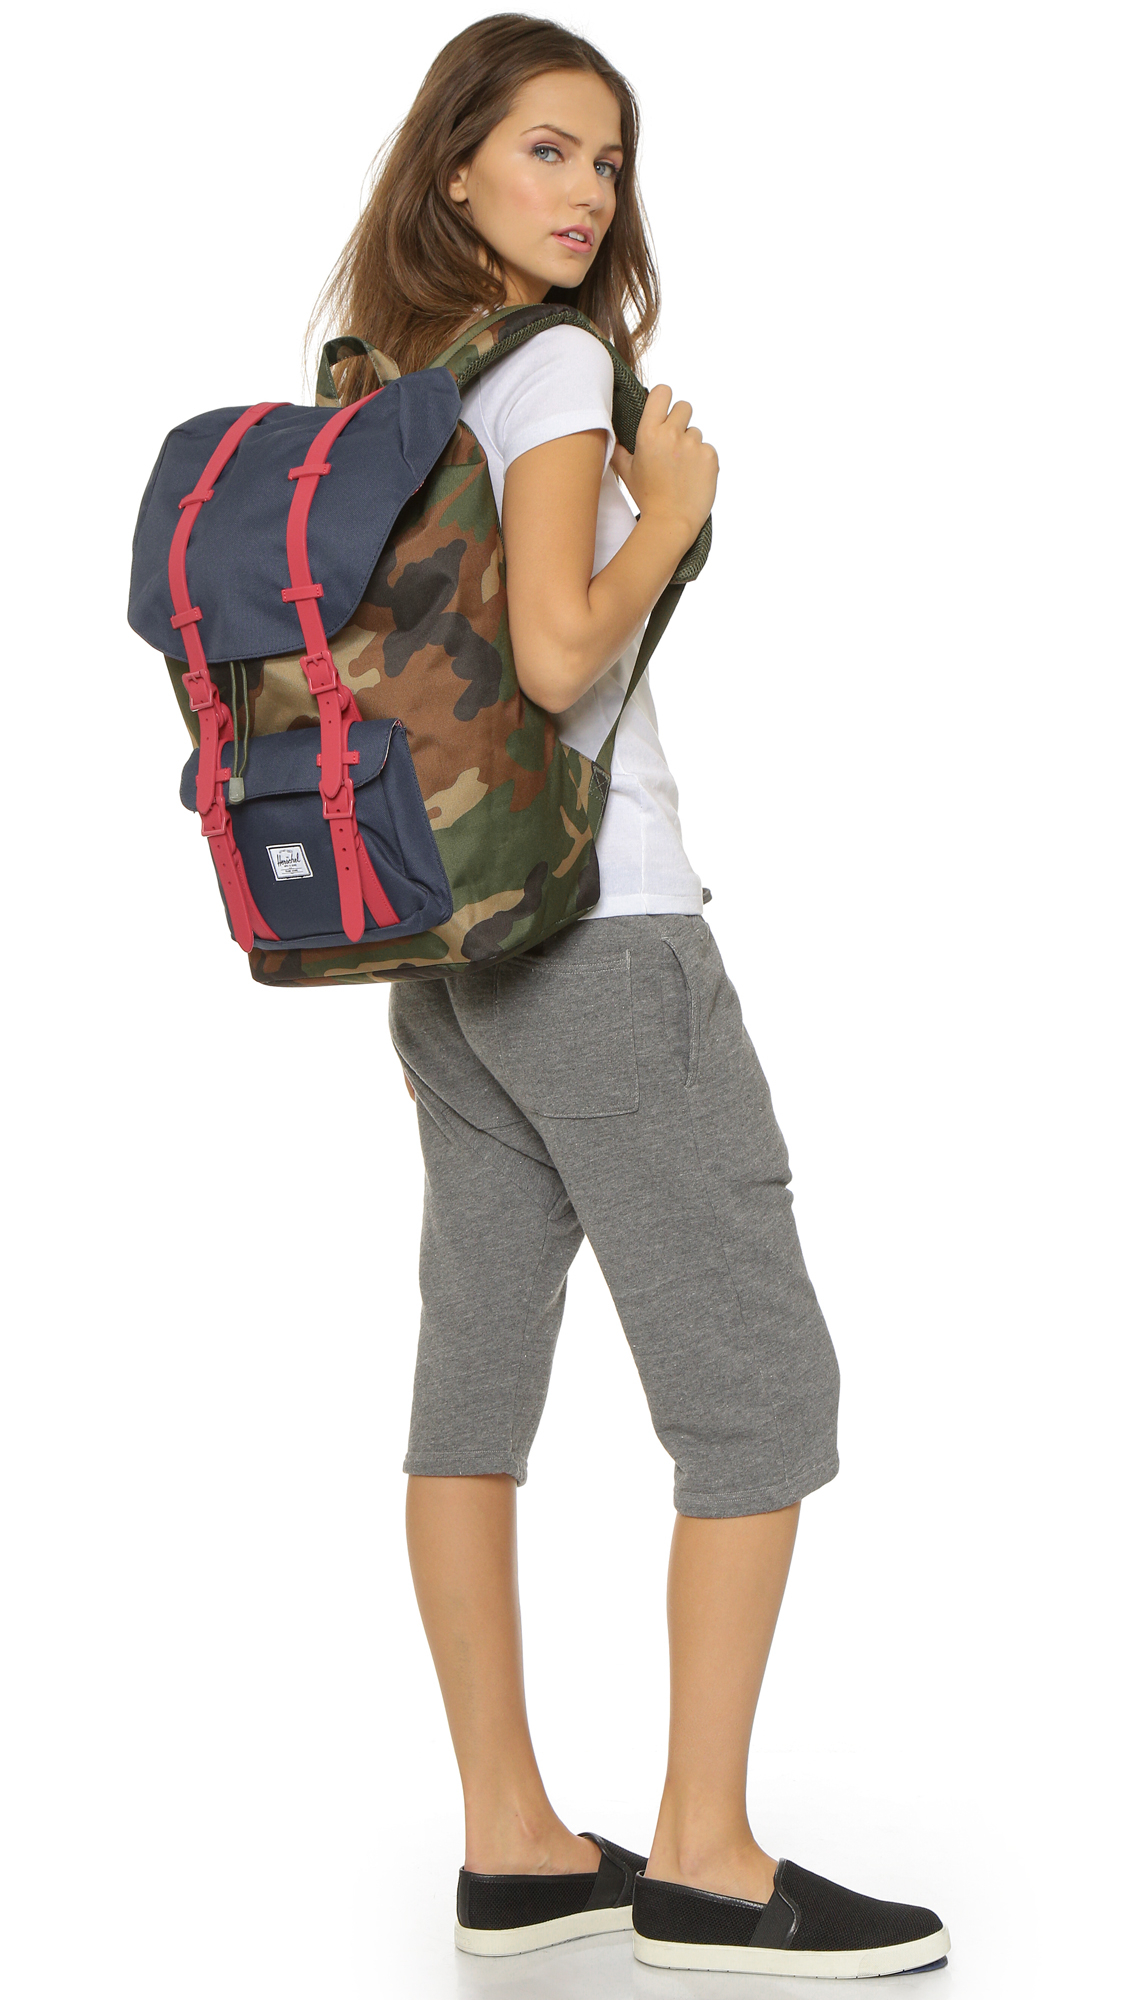 Herschel Supply Co. Little America Backpack - Woodland Camo/Navy/Red in  Green | Lyst